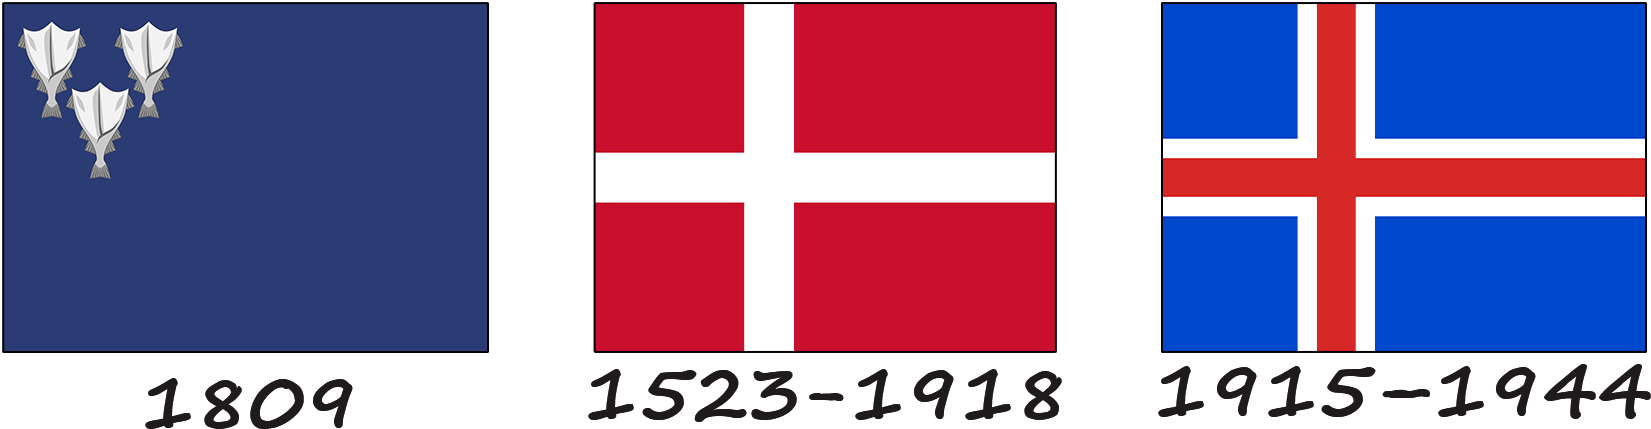 History of the flag of Iceland